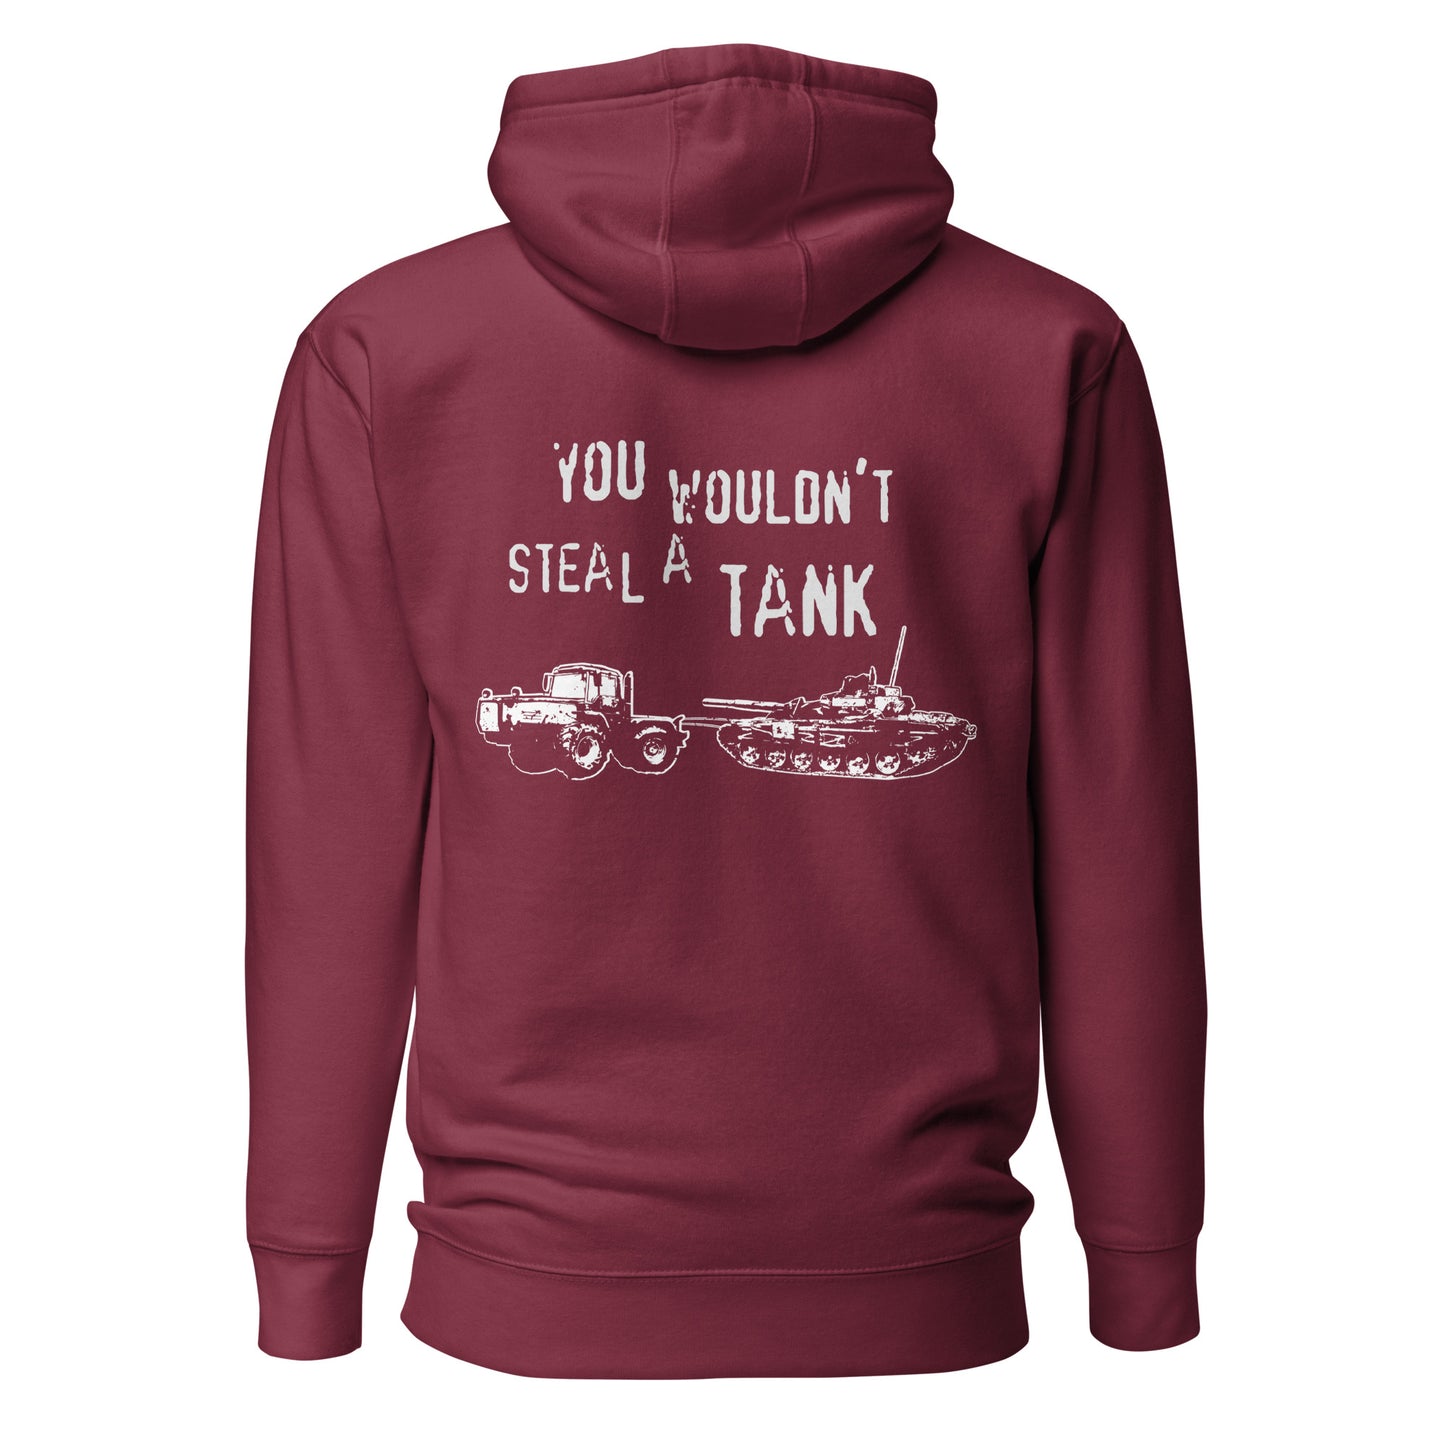 You Wouldn't Steal a Tank Hoodie